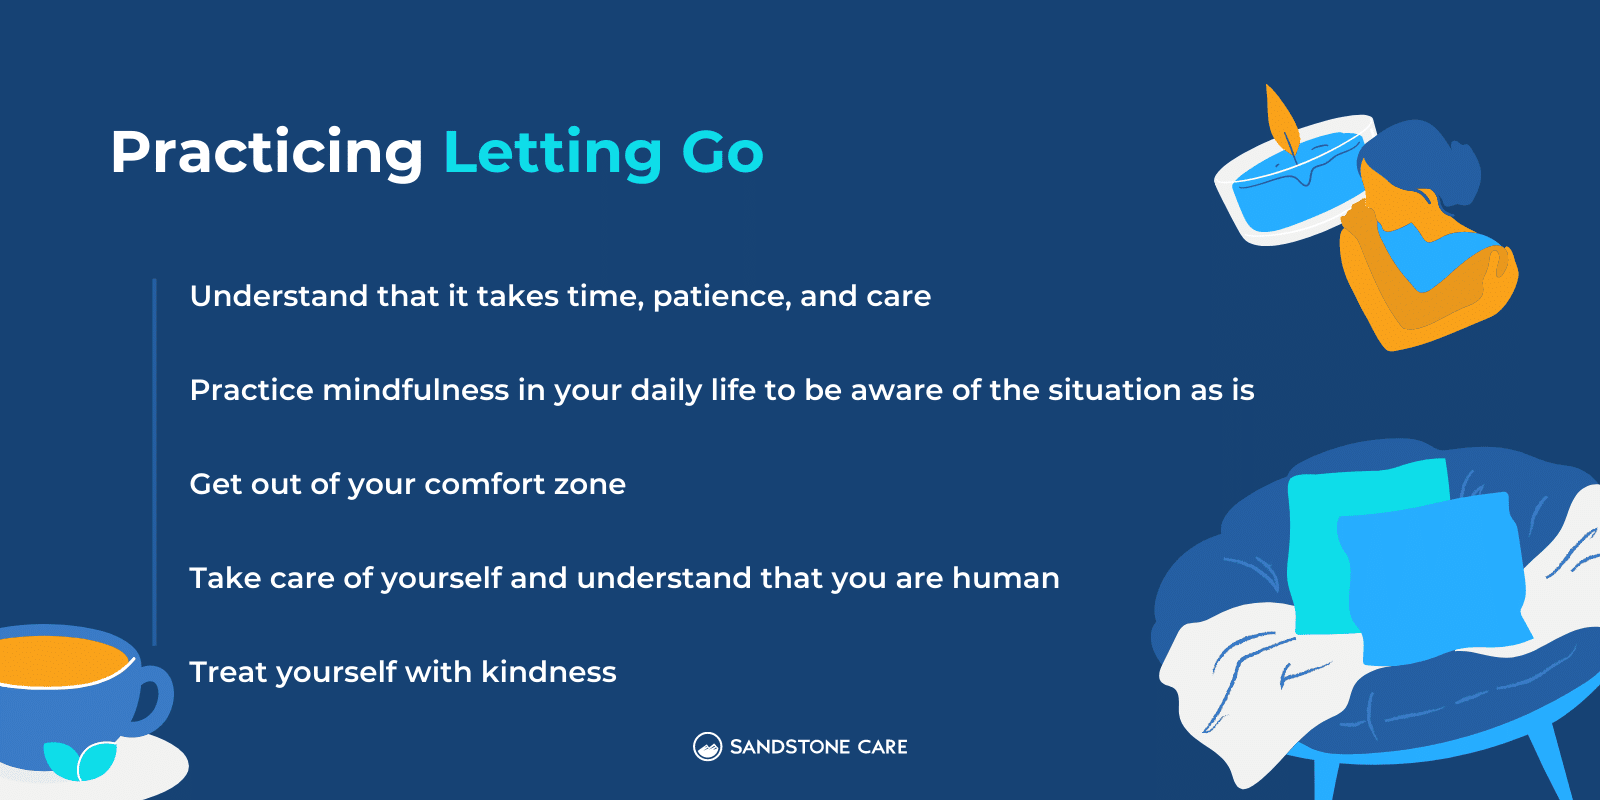 Tips for practicing letting go are listed in the image. Illustration of a cup of tea, a comfy chair, a woman hugging herself, and a candle illustration surrounding each corner of the infographic.